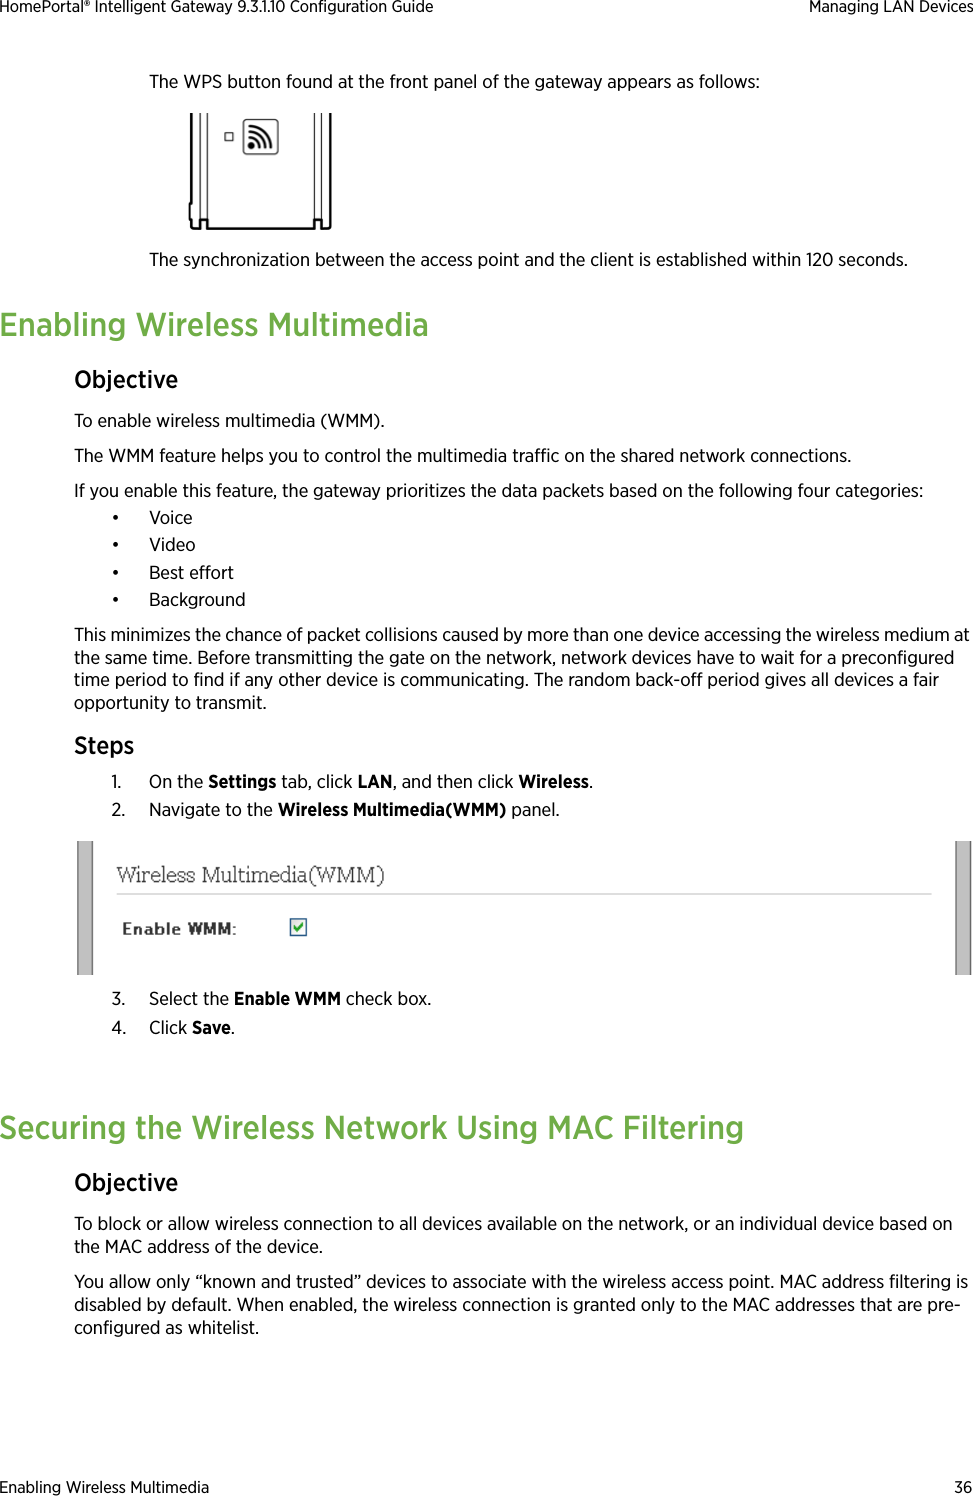 Enabling Wireless Multimedia 36HomePortal® Intelligent Gateway 9.3.1.10 Configuration Guide Managing LAN DevicesThe WPS button found at the front panel of the gateway appears as follows:The synchronization between the access point and the client is established within 120 seconds.Enabling Wireless MultimediaObjectiveTo enable wireless multimedia (WMM).The WMM feature helps you to control the multimedia traffic on the shared network connections.If you enable this feature, the gateway prioritizes the data packets based on the following four categories:•Voice•Video• Best effort•BackgroundThis minimizes the chance of packet collisions caused by more than one device accessing the wireless medium at the same time. Before transmitting the gate on the network, network devices have to wait for a preconfigured time period to find if any other device is communicating. The random back-off period gives all devices a fair opportunity to transmit.Steps1. On the Settings tab, click LAN, and then click Wireless.2. Navigate to the Wireless Multimedia(WMM) panel.3. Select the Enable WMM check box.4. Click Save.Securing the Wireless Network Using MAC FilteringObjectiveTo block or allow wireless connection to all devices available on the network, or an individual device based on the MAC address of the device. You allow only “known and trusted” devices to associate with the wireless access point. MAC address filtering is disabled by default. When enabled, the wireless connection is granted only to the MAC addresses that are pre-configured as whitelist.